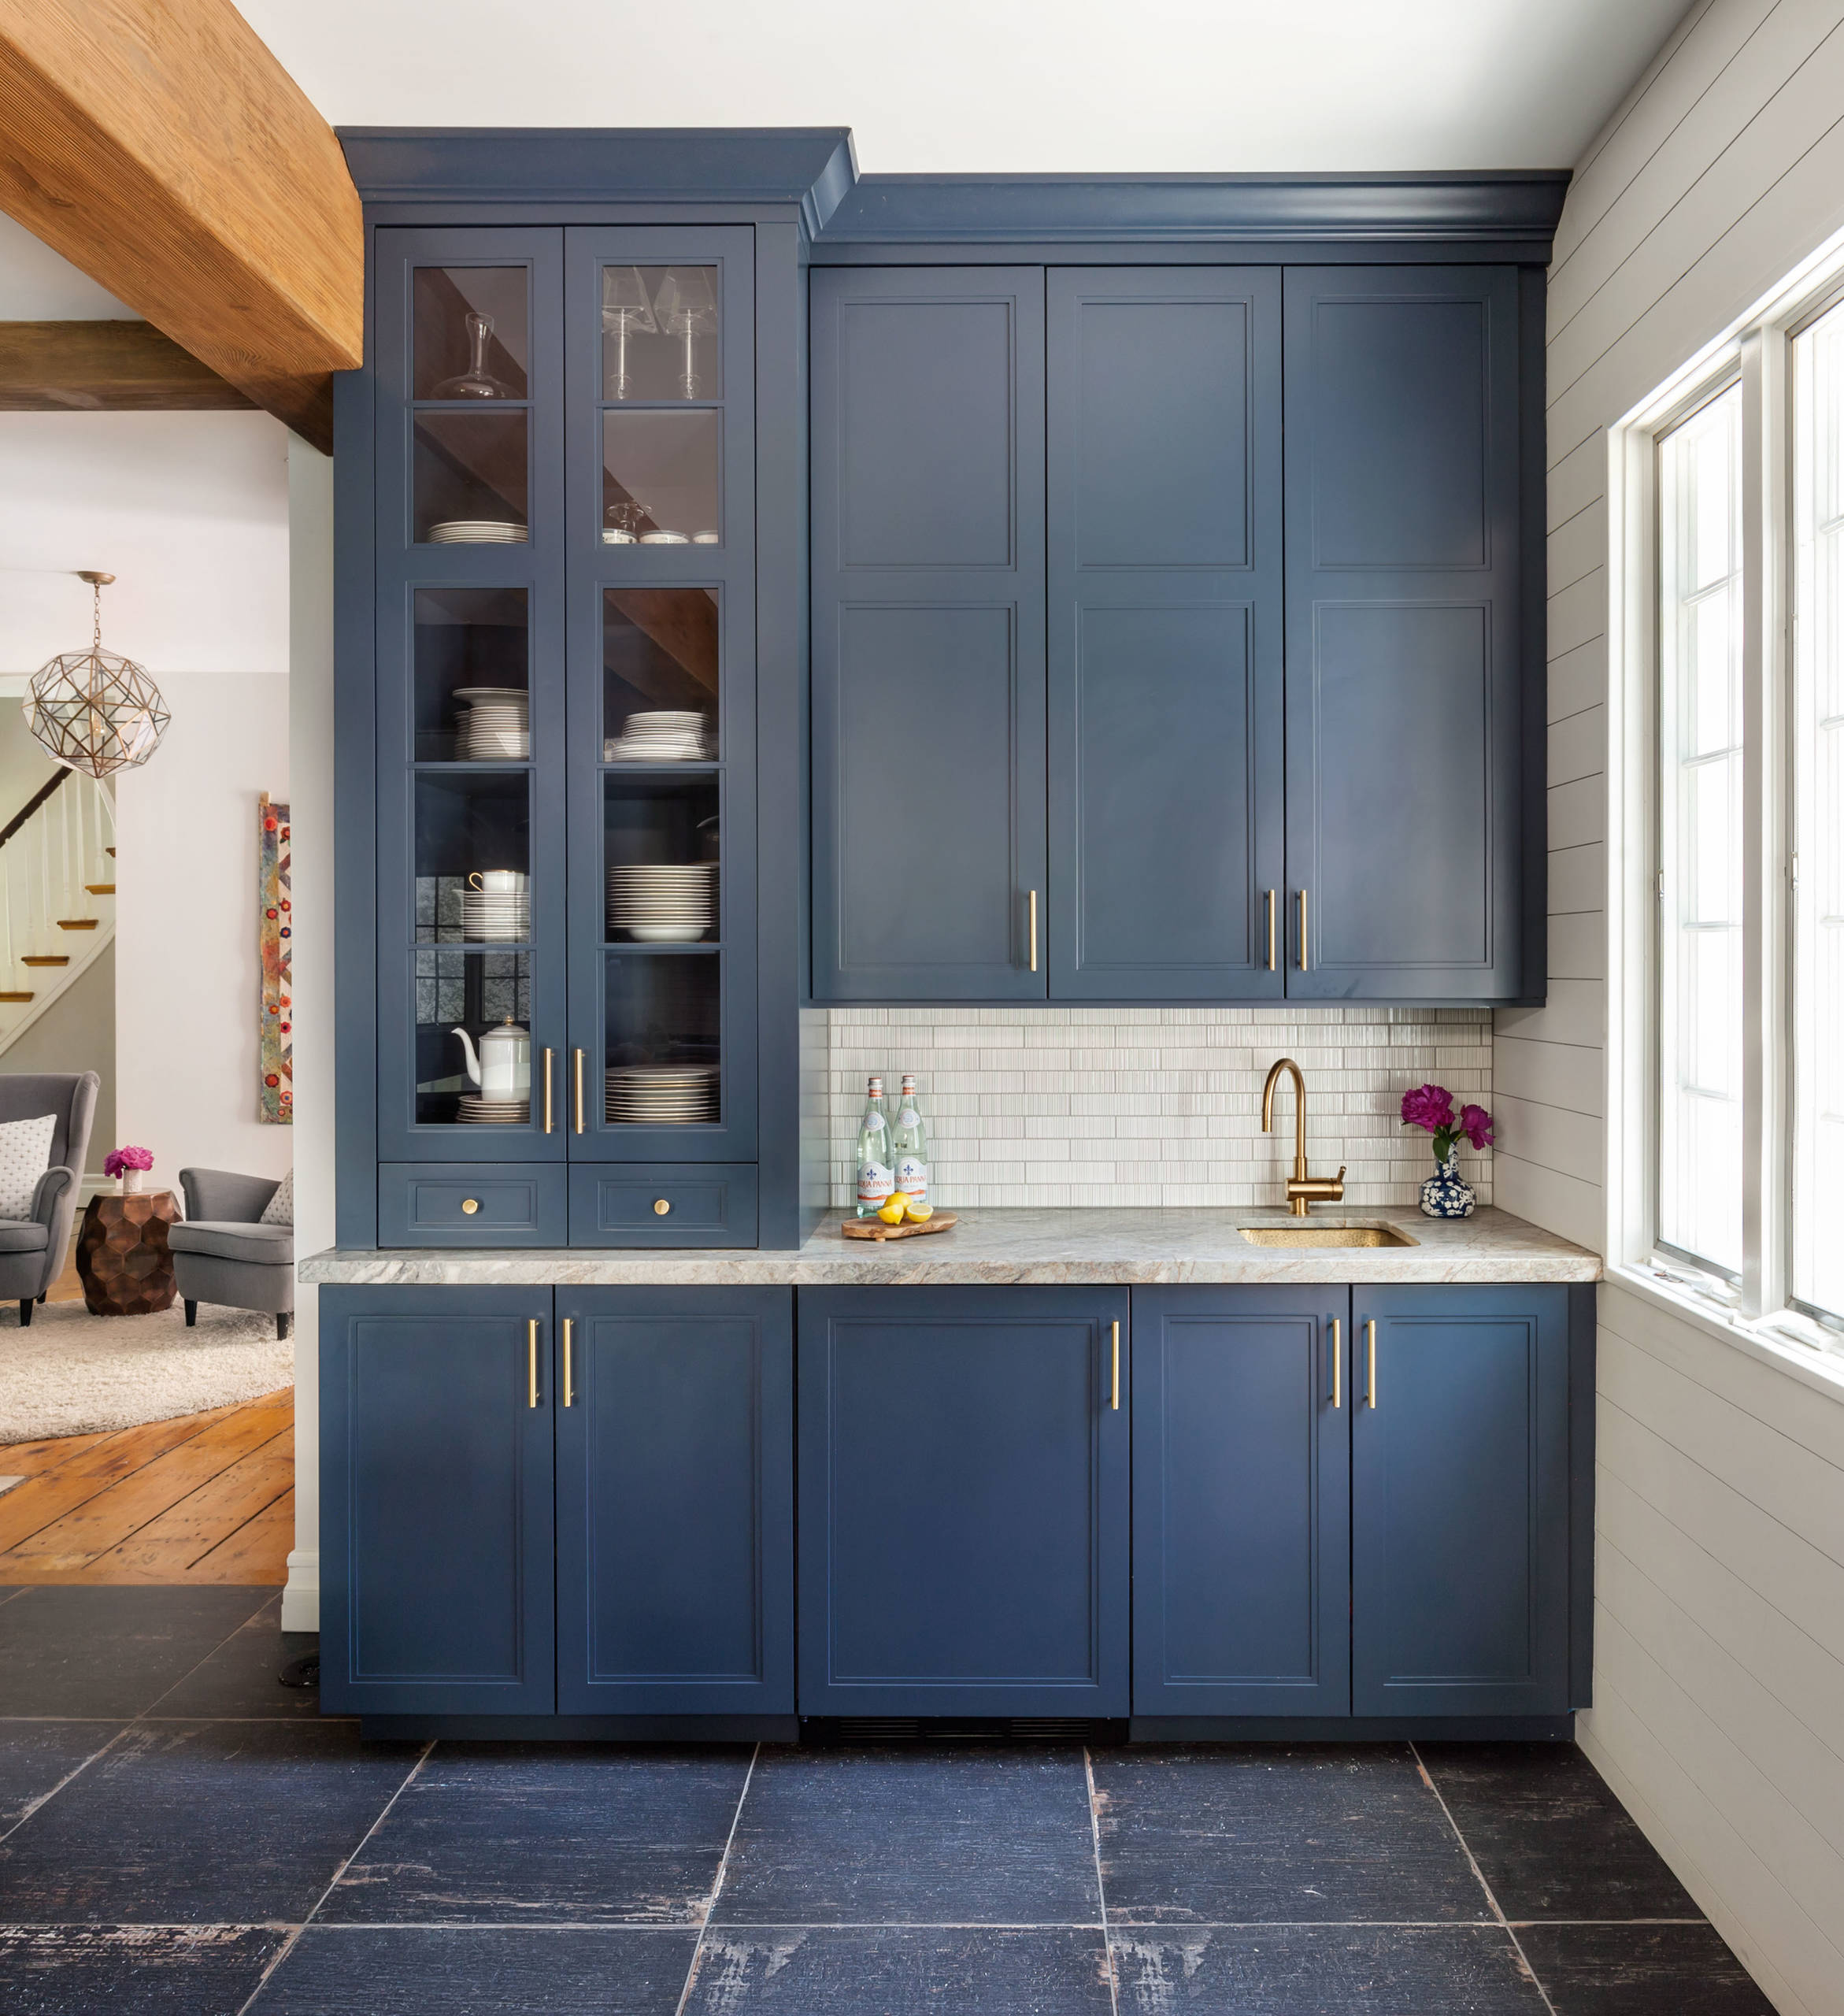 What Color Countertop Goes With Blue Cabinets | www ...